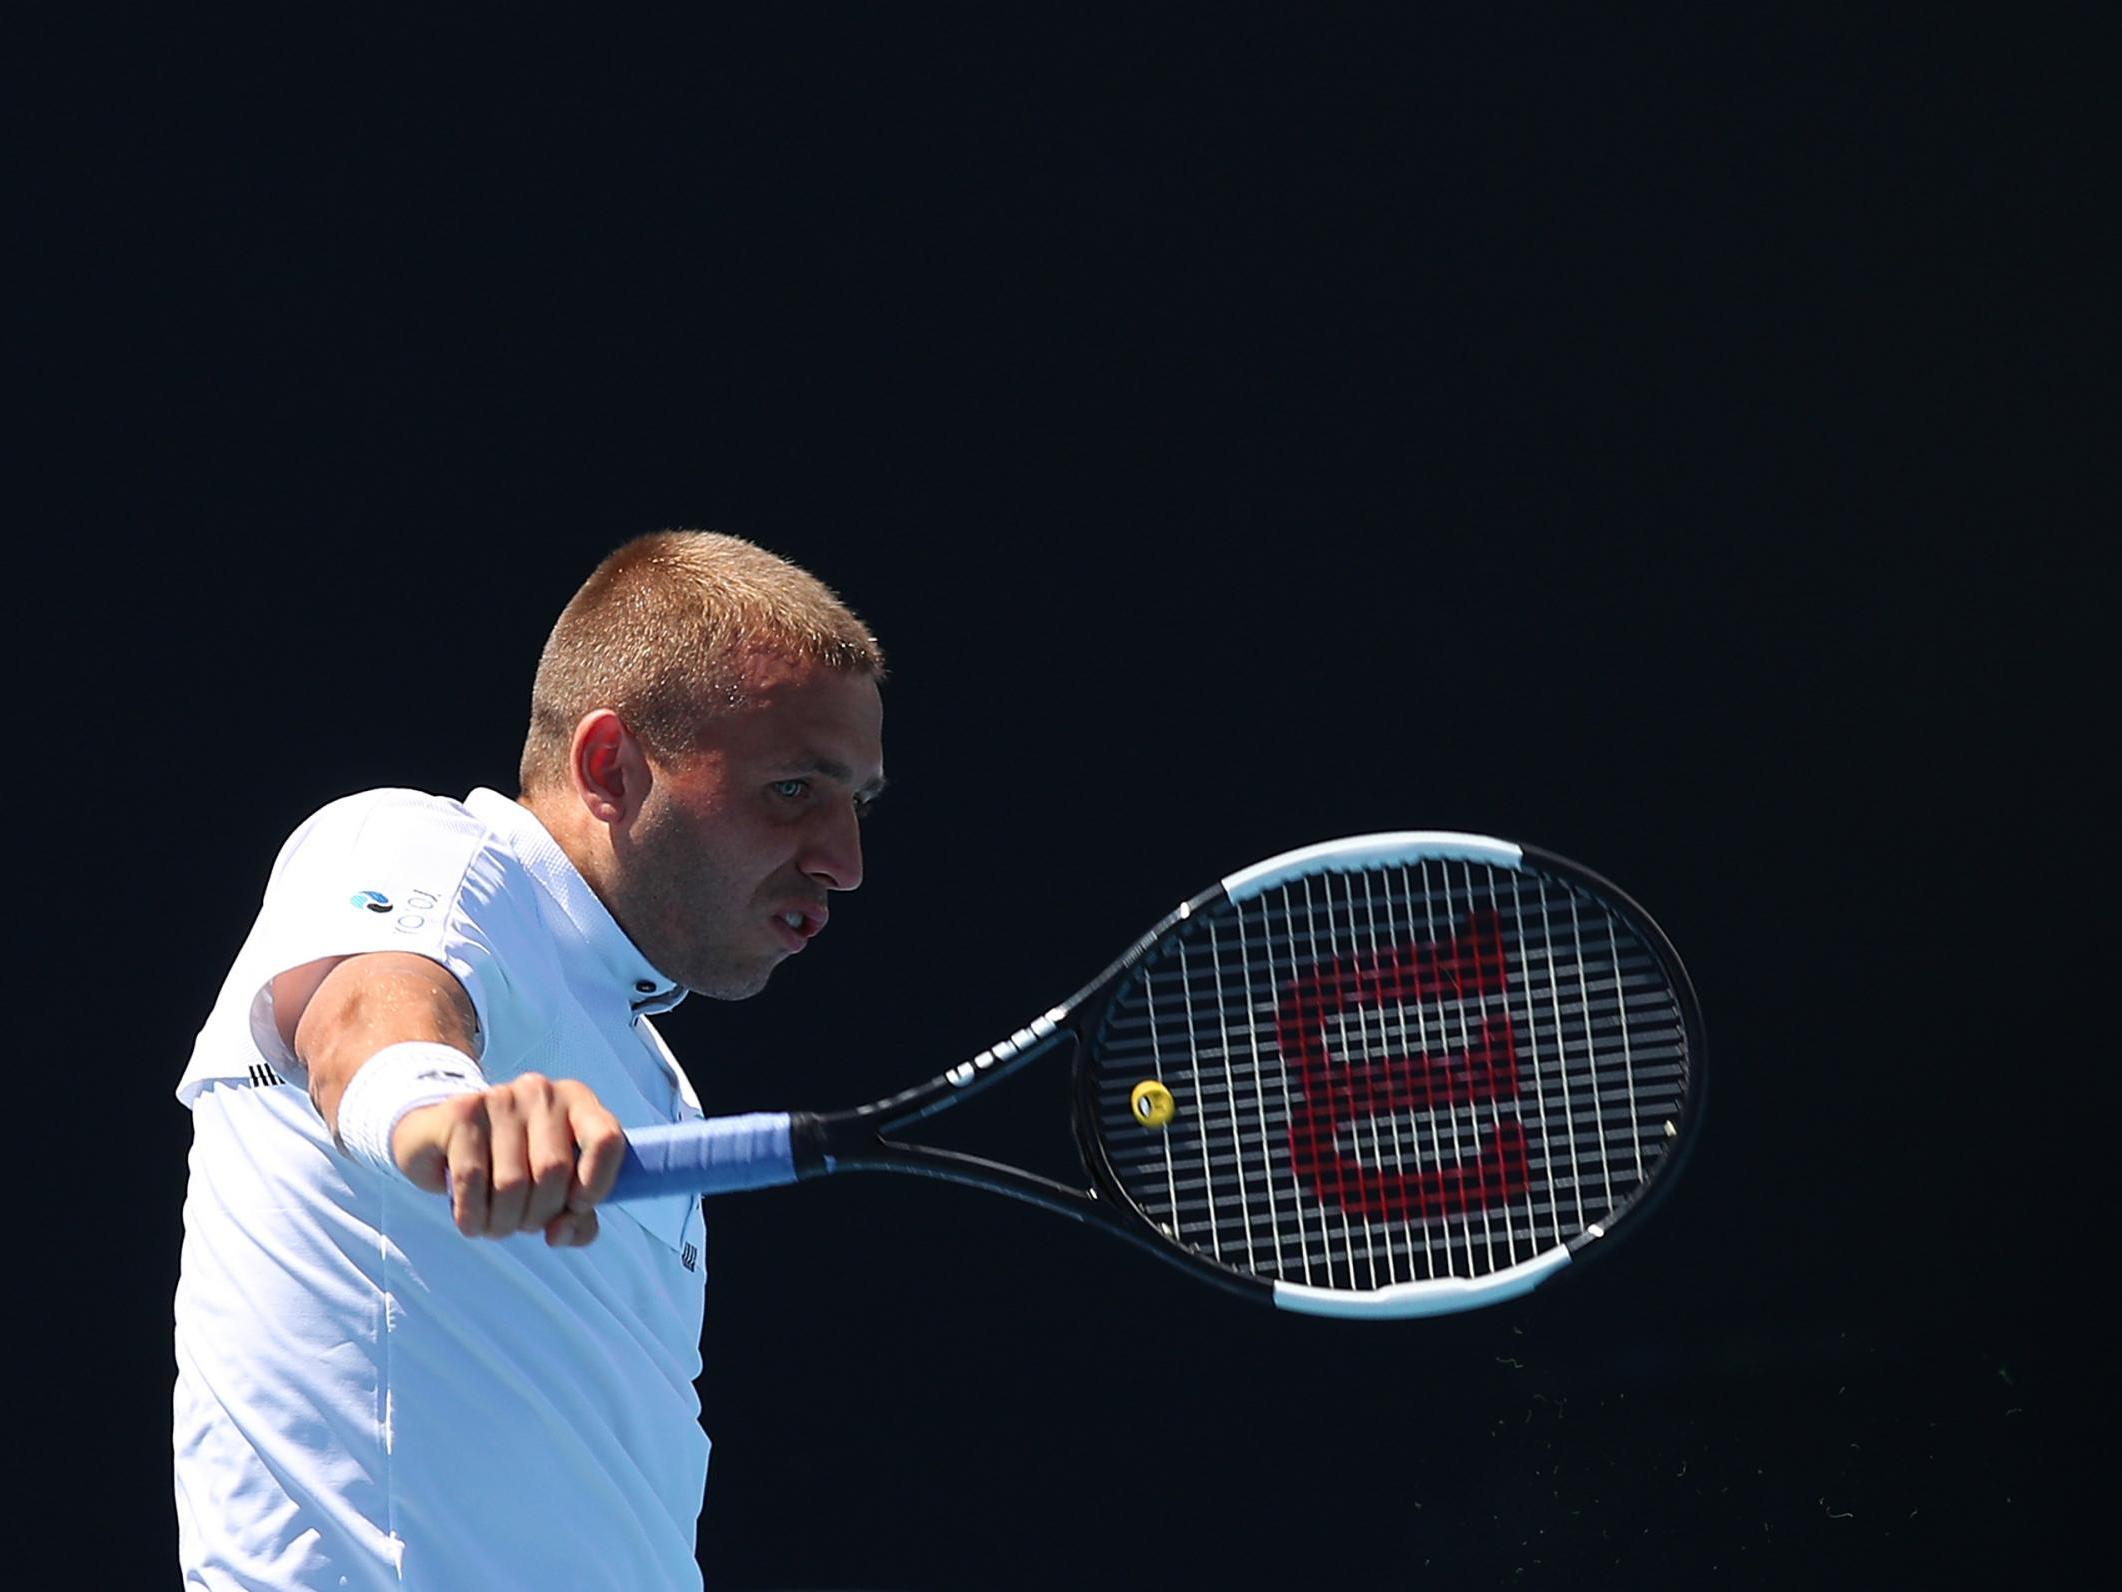 Australian Open 2019 Dan Evans produces shot of the year contender in qualifying The Independent The Independent